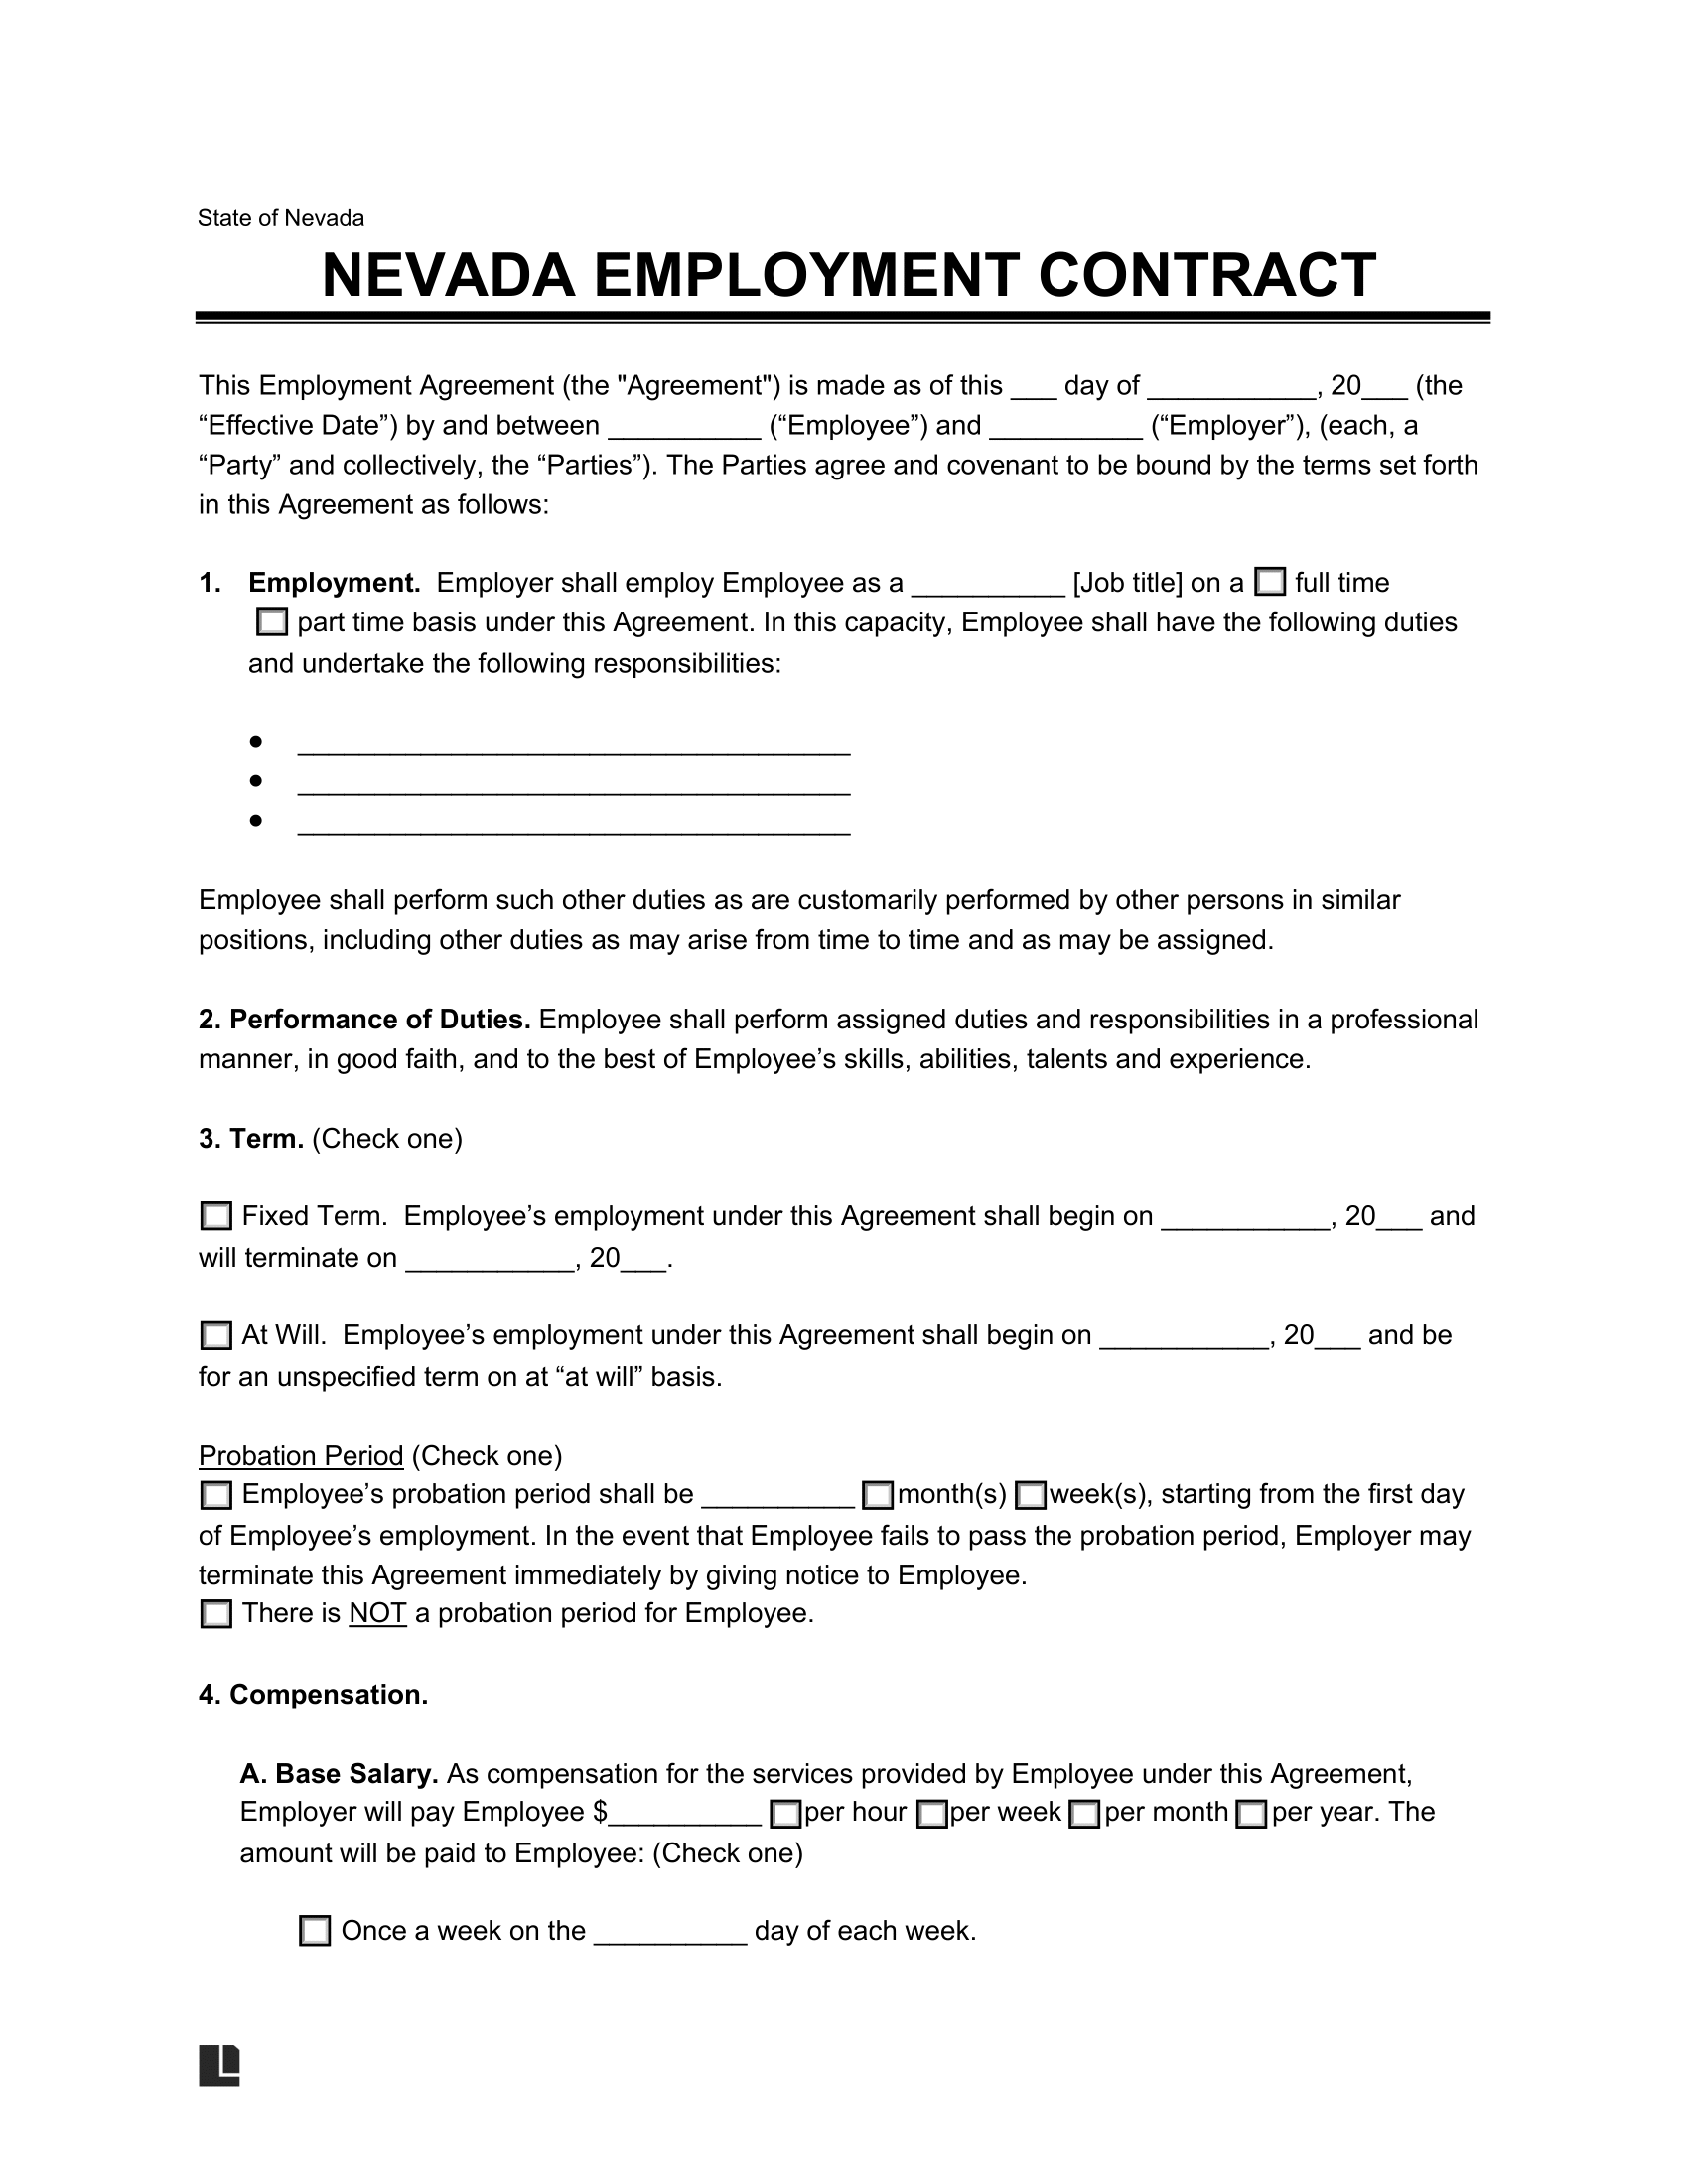 Nevada Employment Contract Template